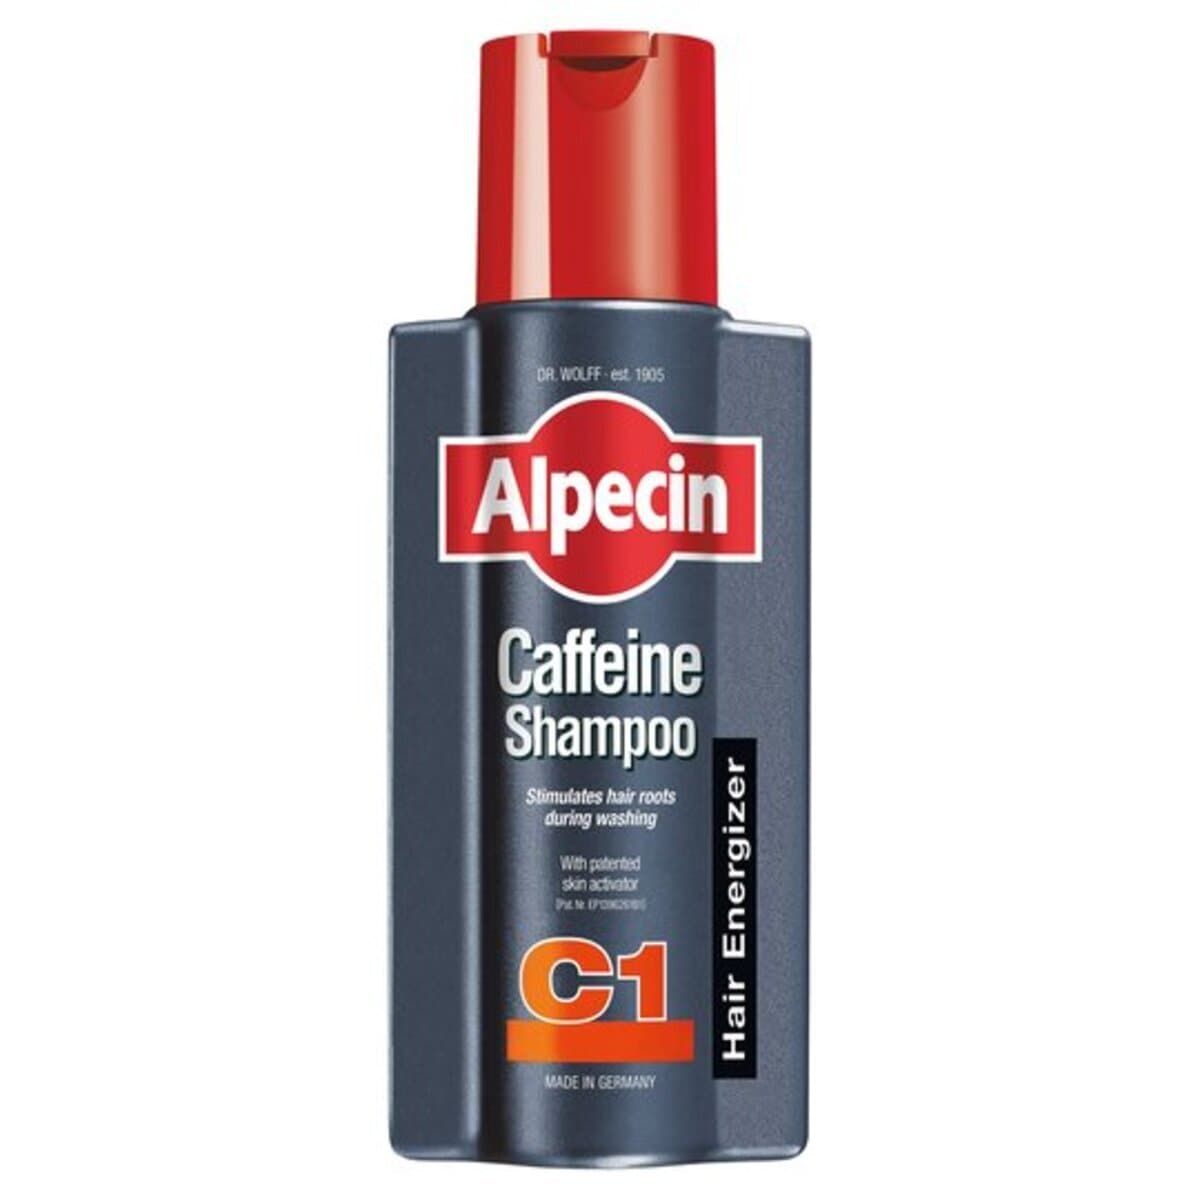 Alpecin Caffeine Shampoo, 200ml - How long does it take to grow your hair out